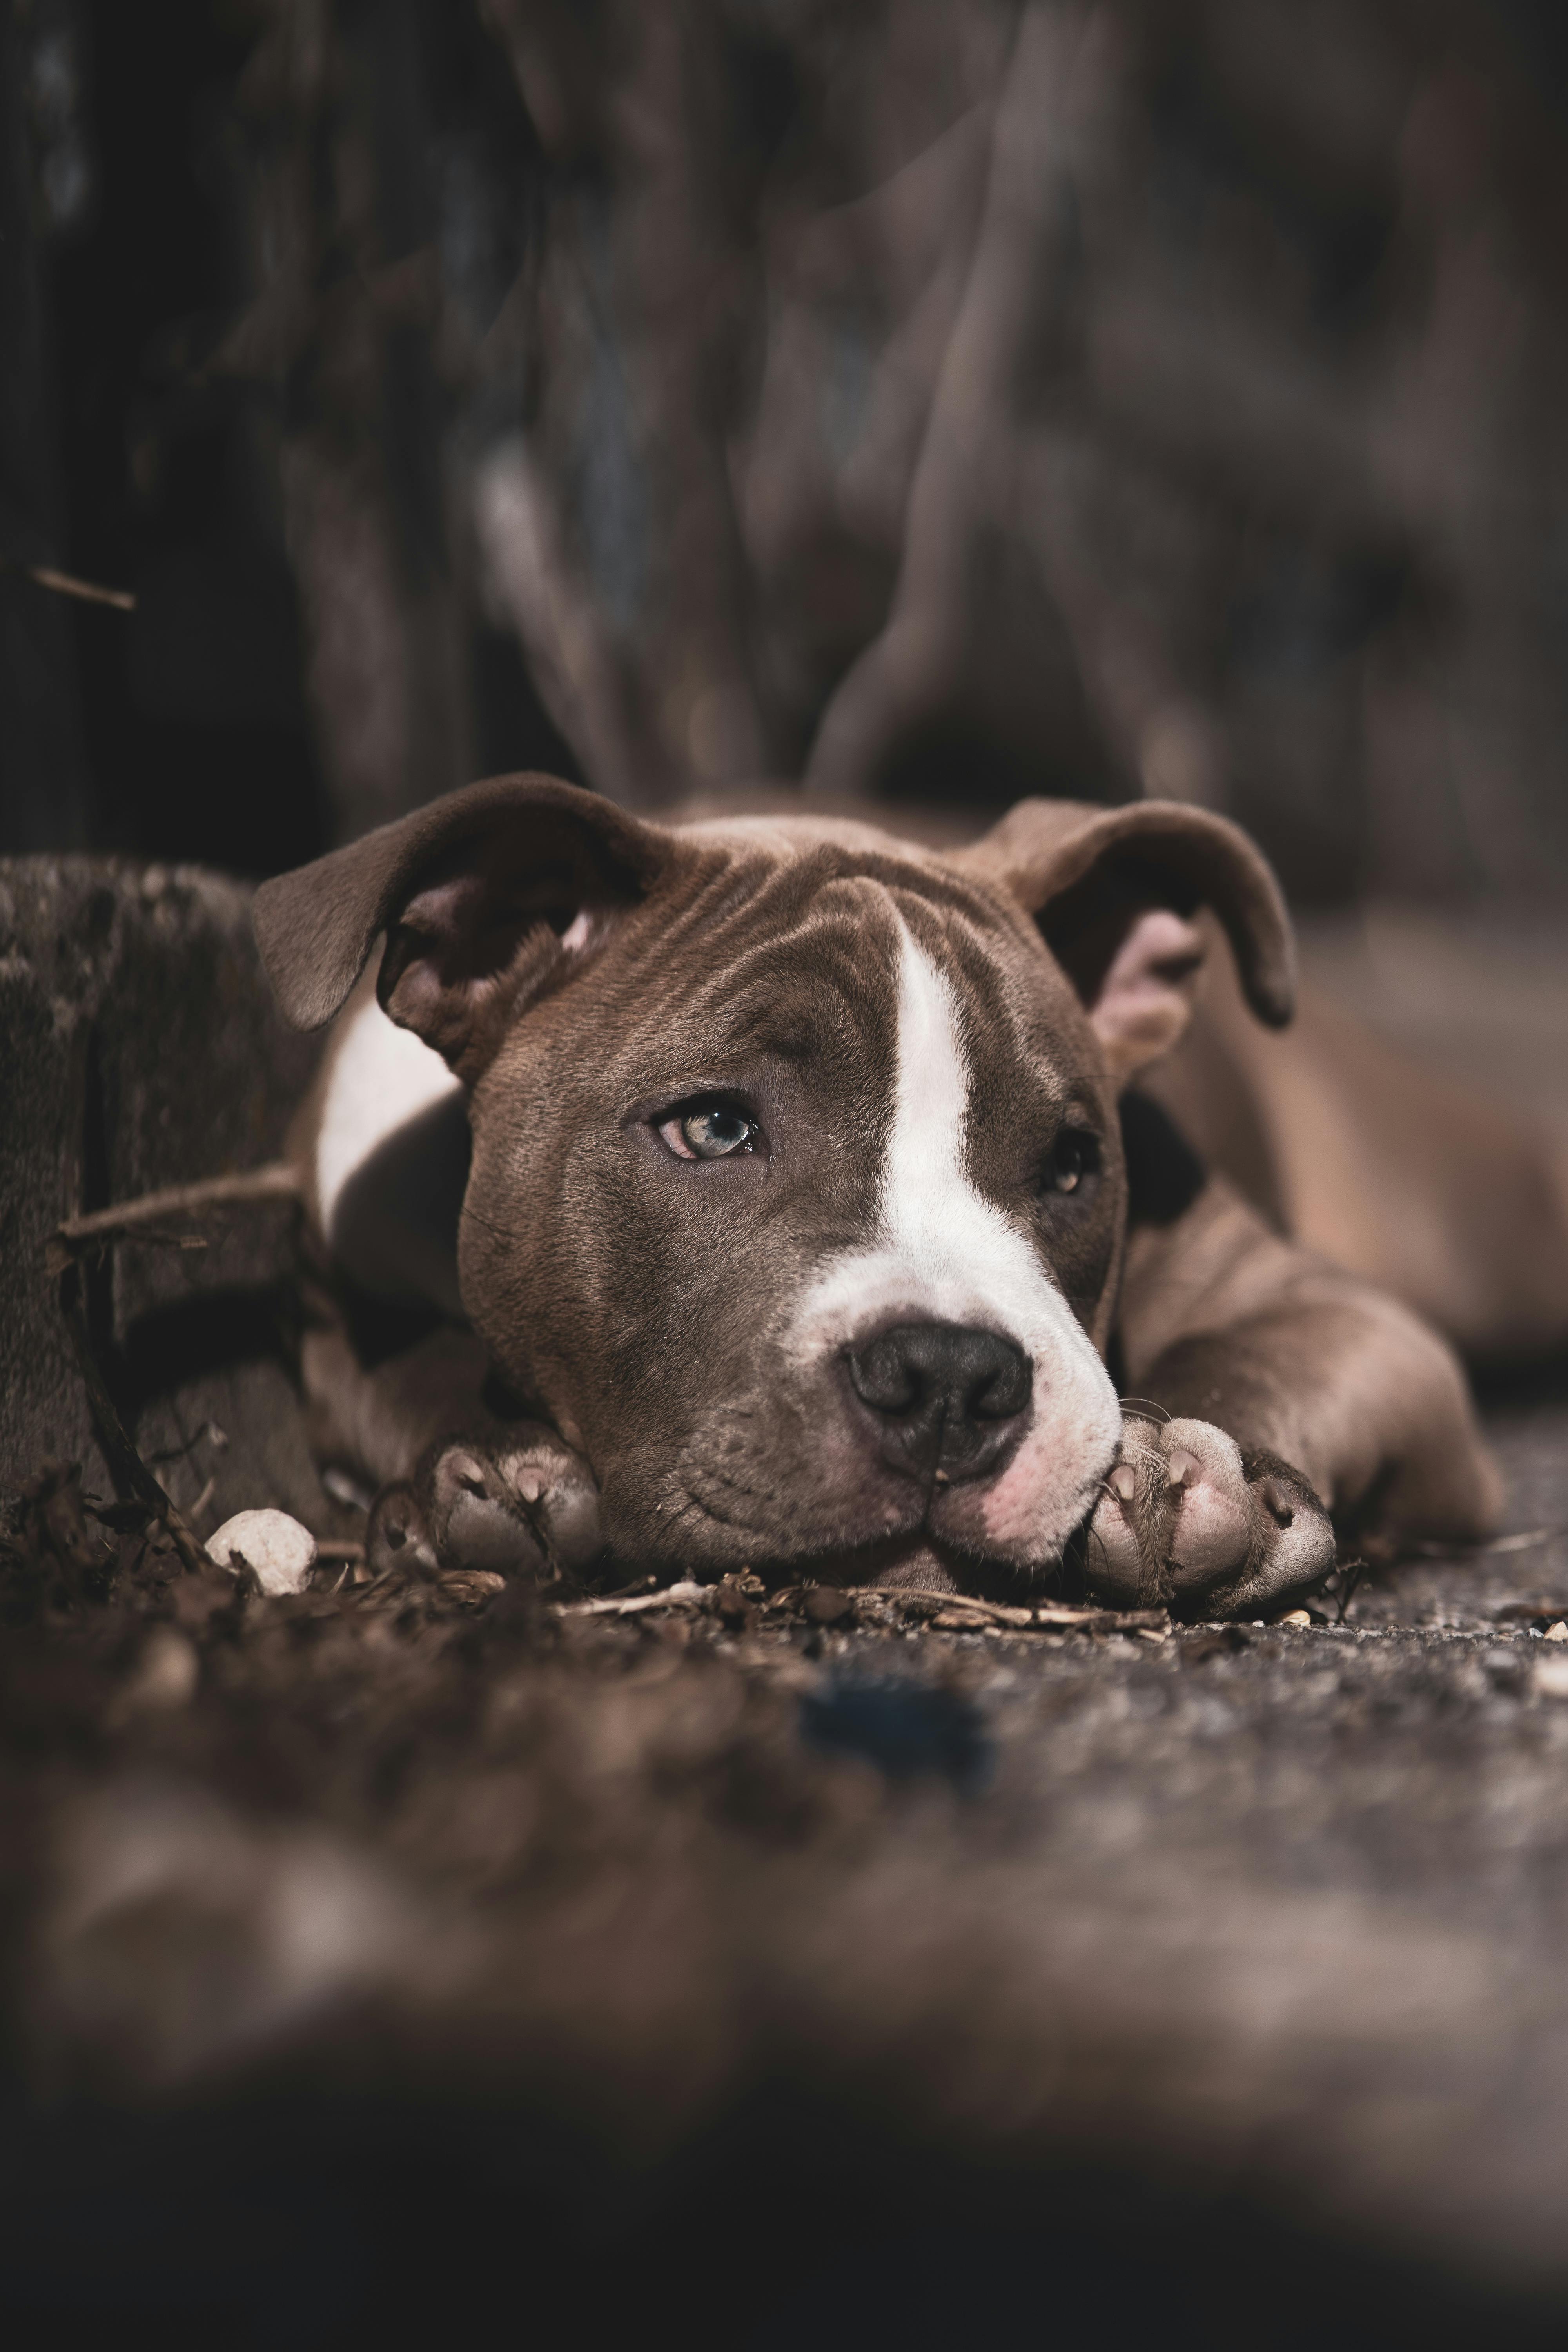 100+] Bully Dog Pictures | Wallpapers.com